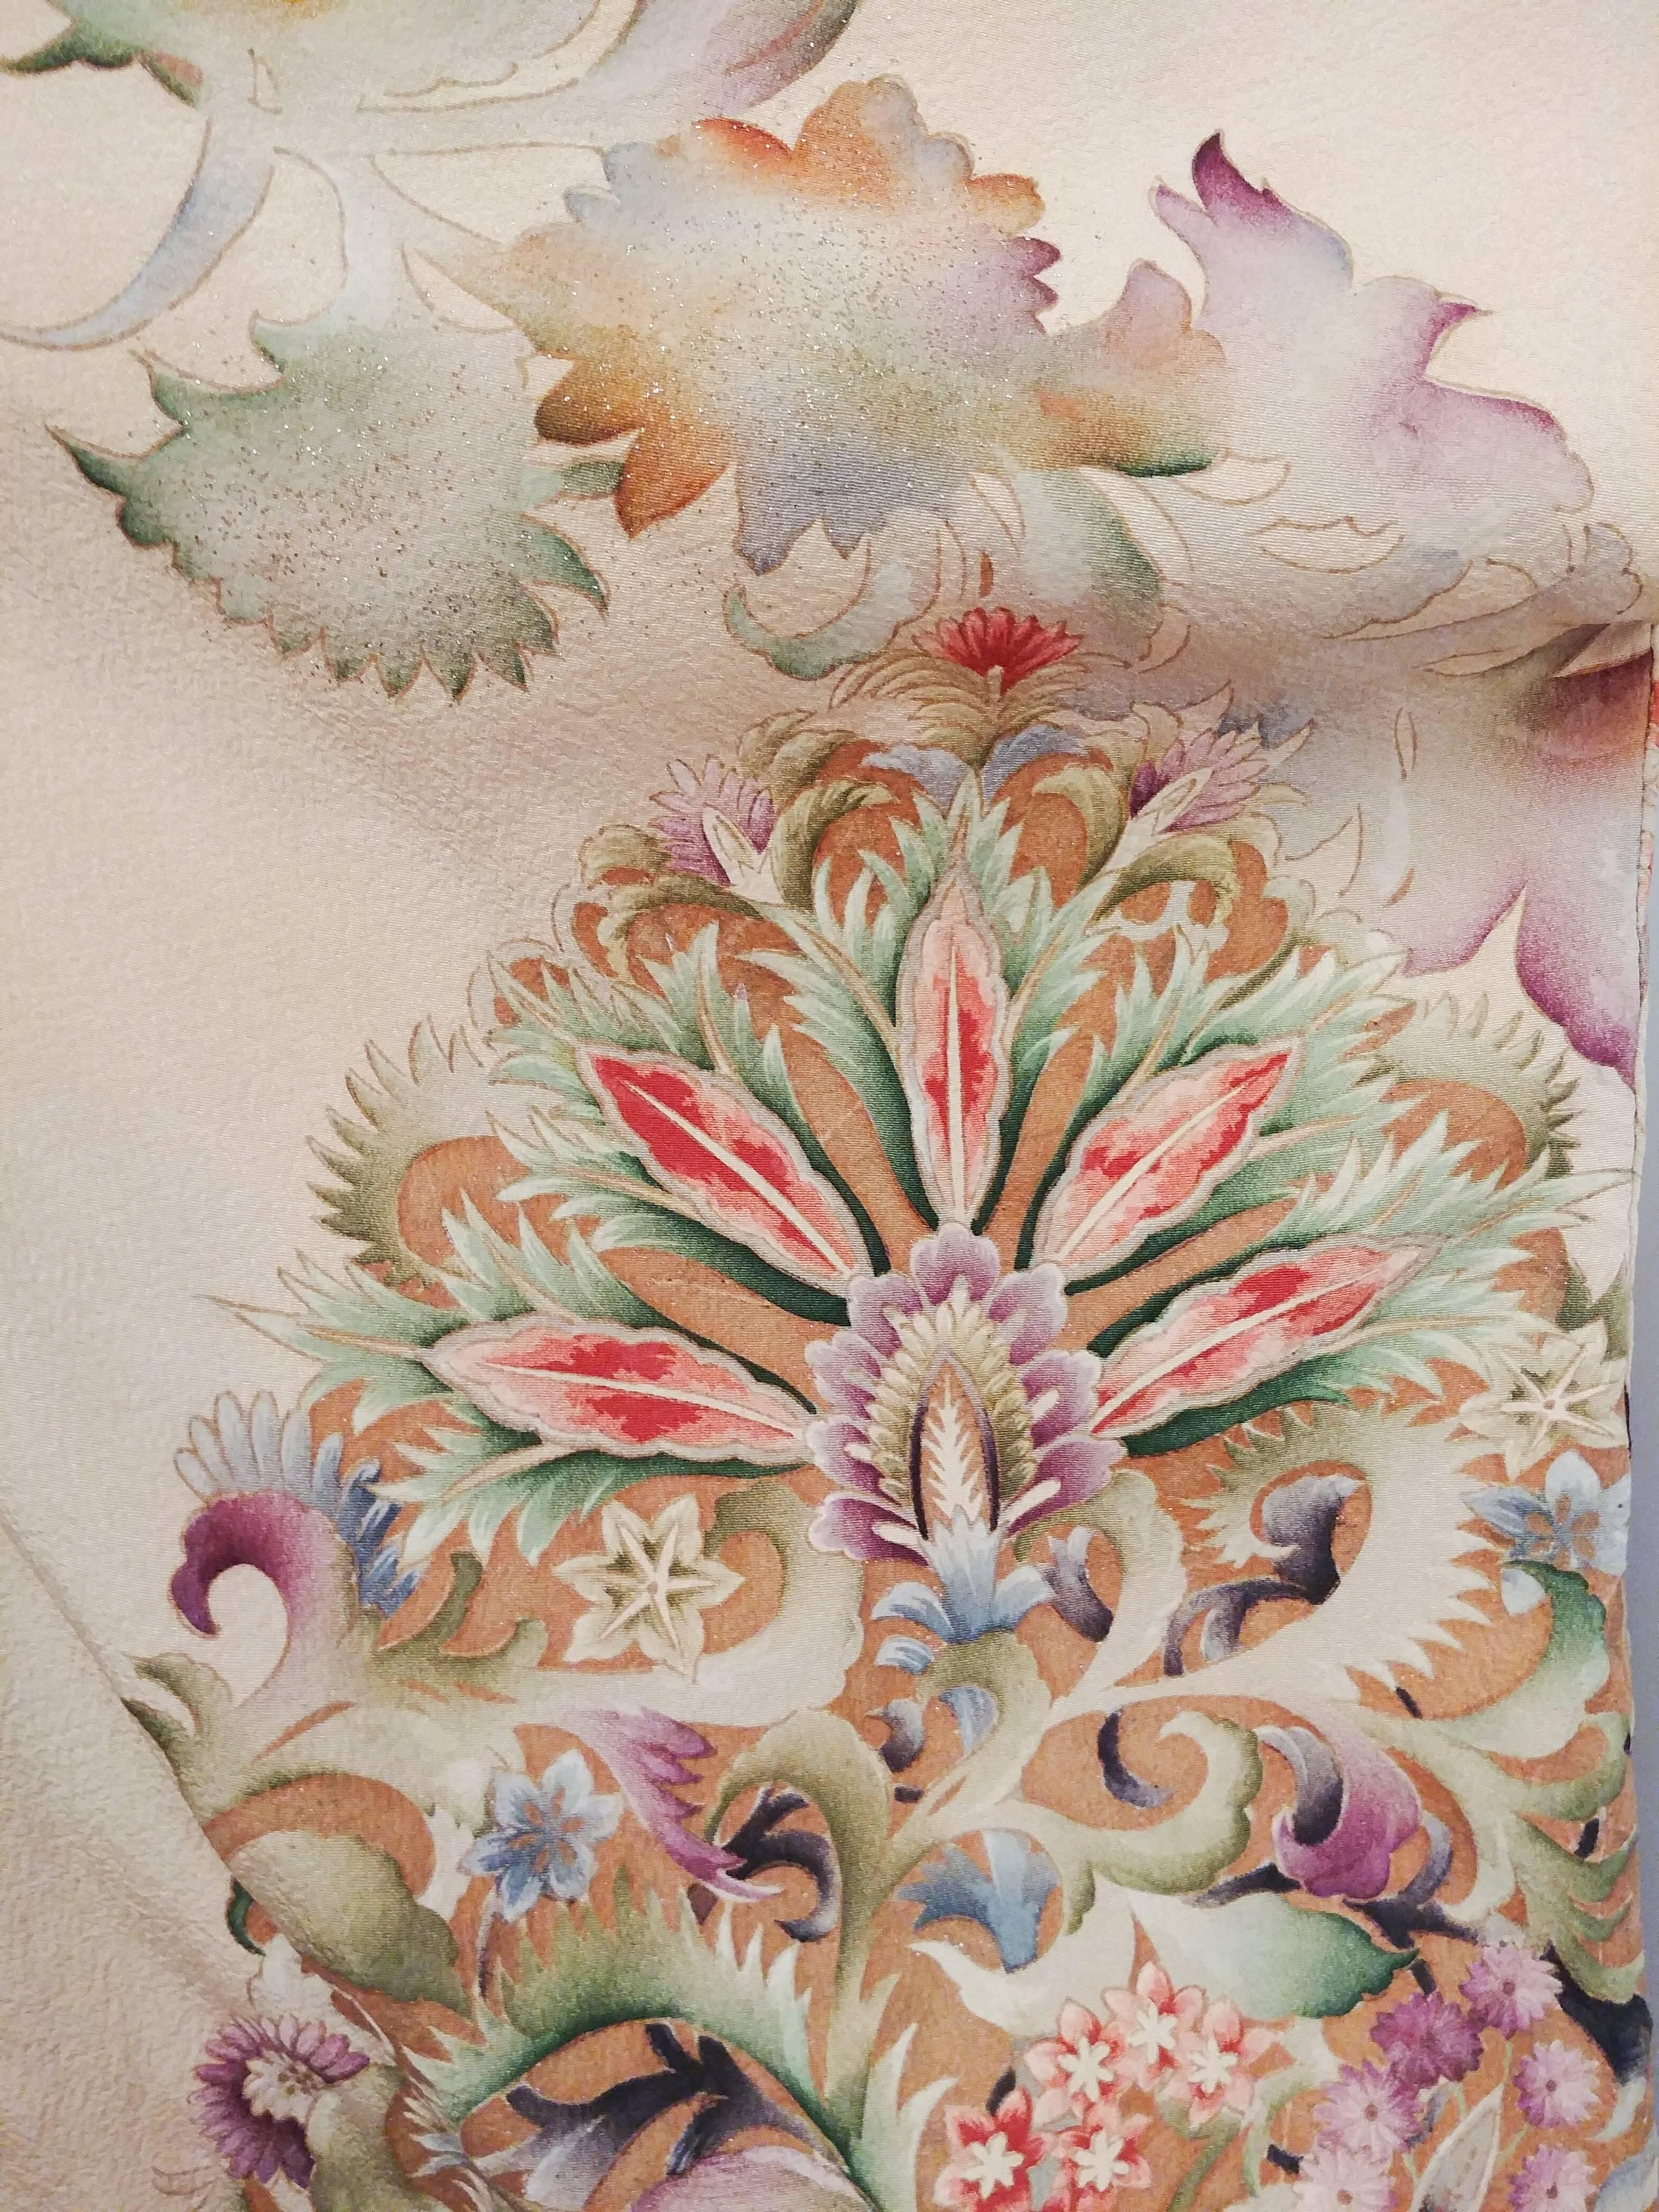 1940s Hand Painted Silk Kimono. Exquisite hand-painted kimono wth beautiful watercolour-esque imagery all over sleeves, front, and back. Metallic paint details perfectly accents motifs of birds and foliage. 